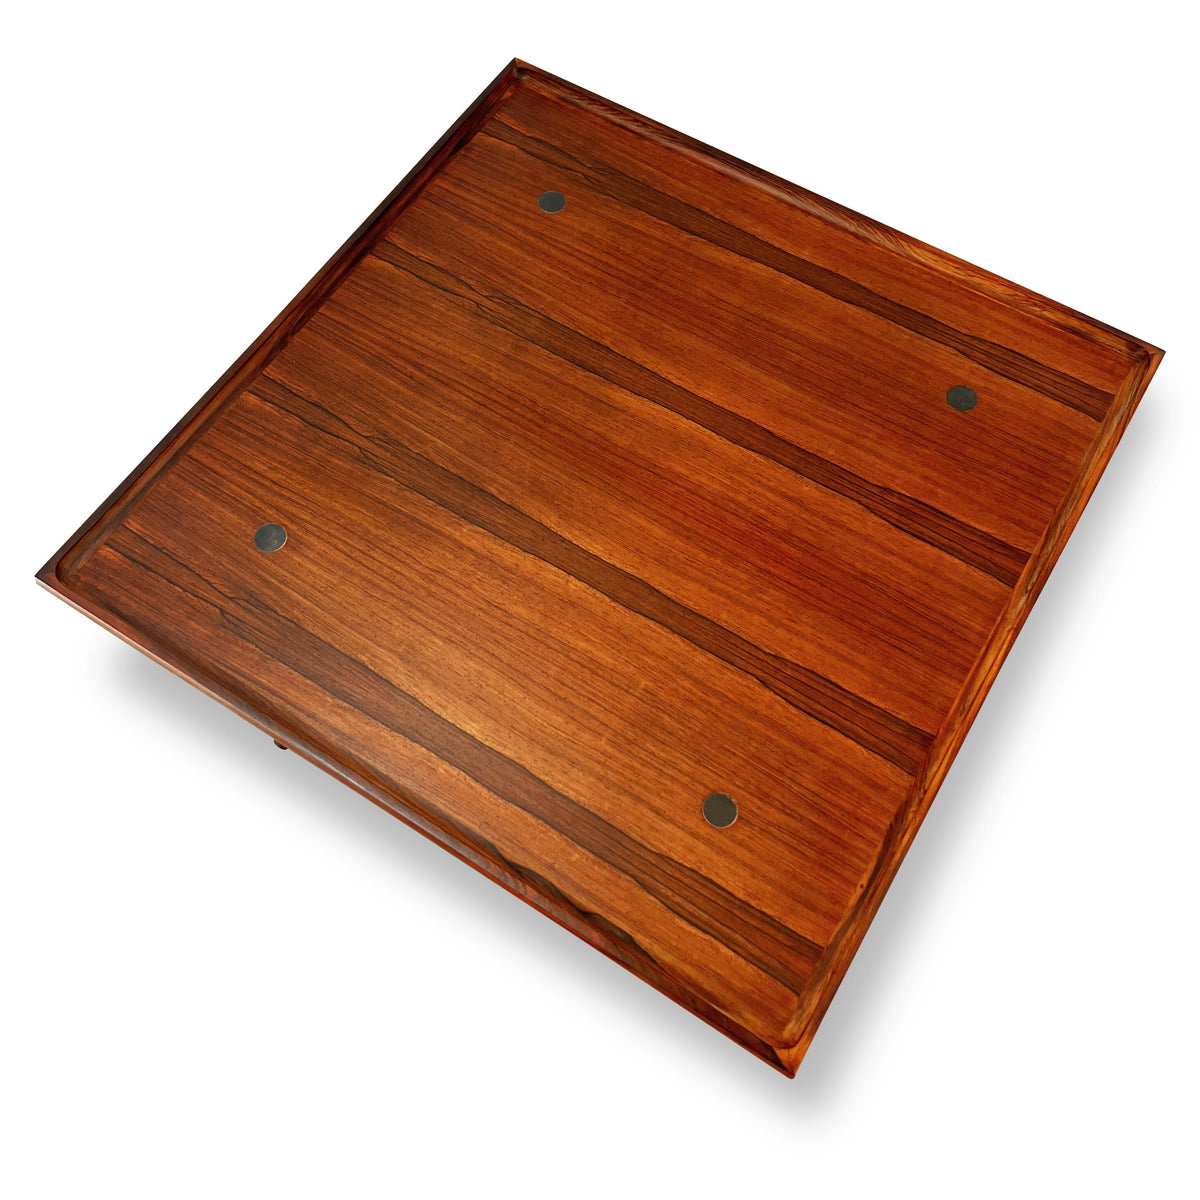 Danish Chrome and Rosewood Coffee Table by Jens Quistgaard